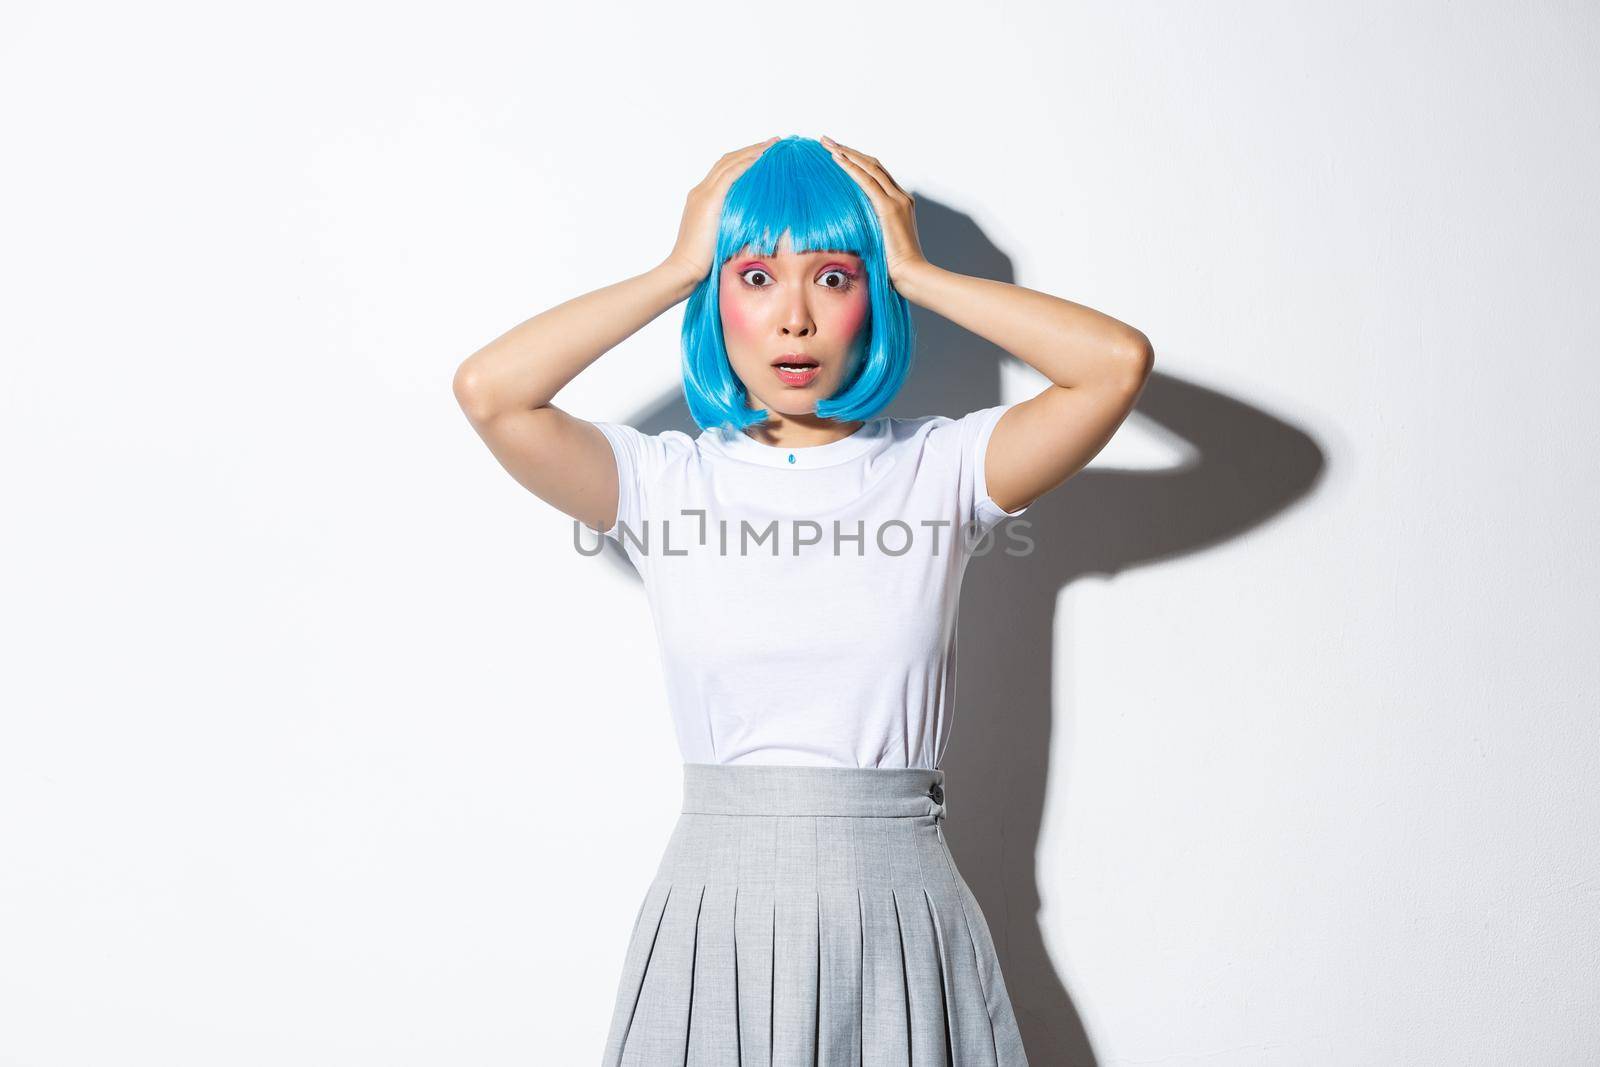 Portrait of shocked and anxious asian girl in blue hair wig, holding hands on head and looking worried, standing over white background in halloween costume.